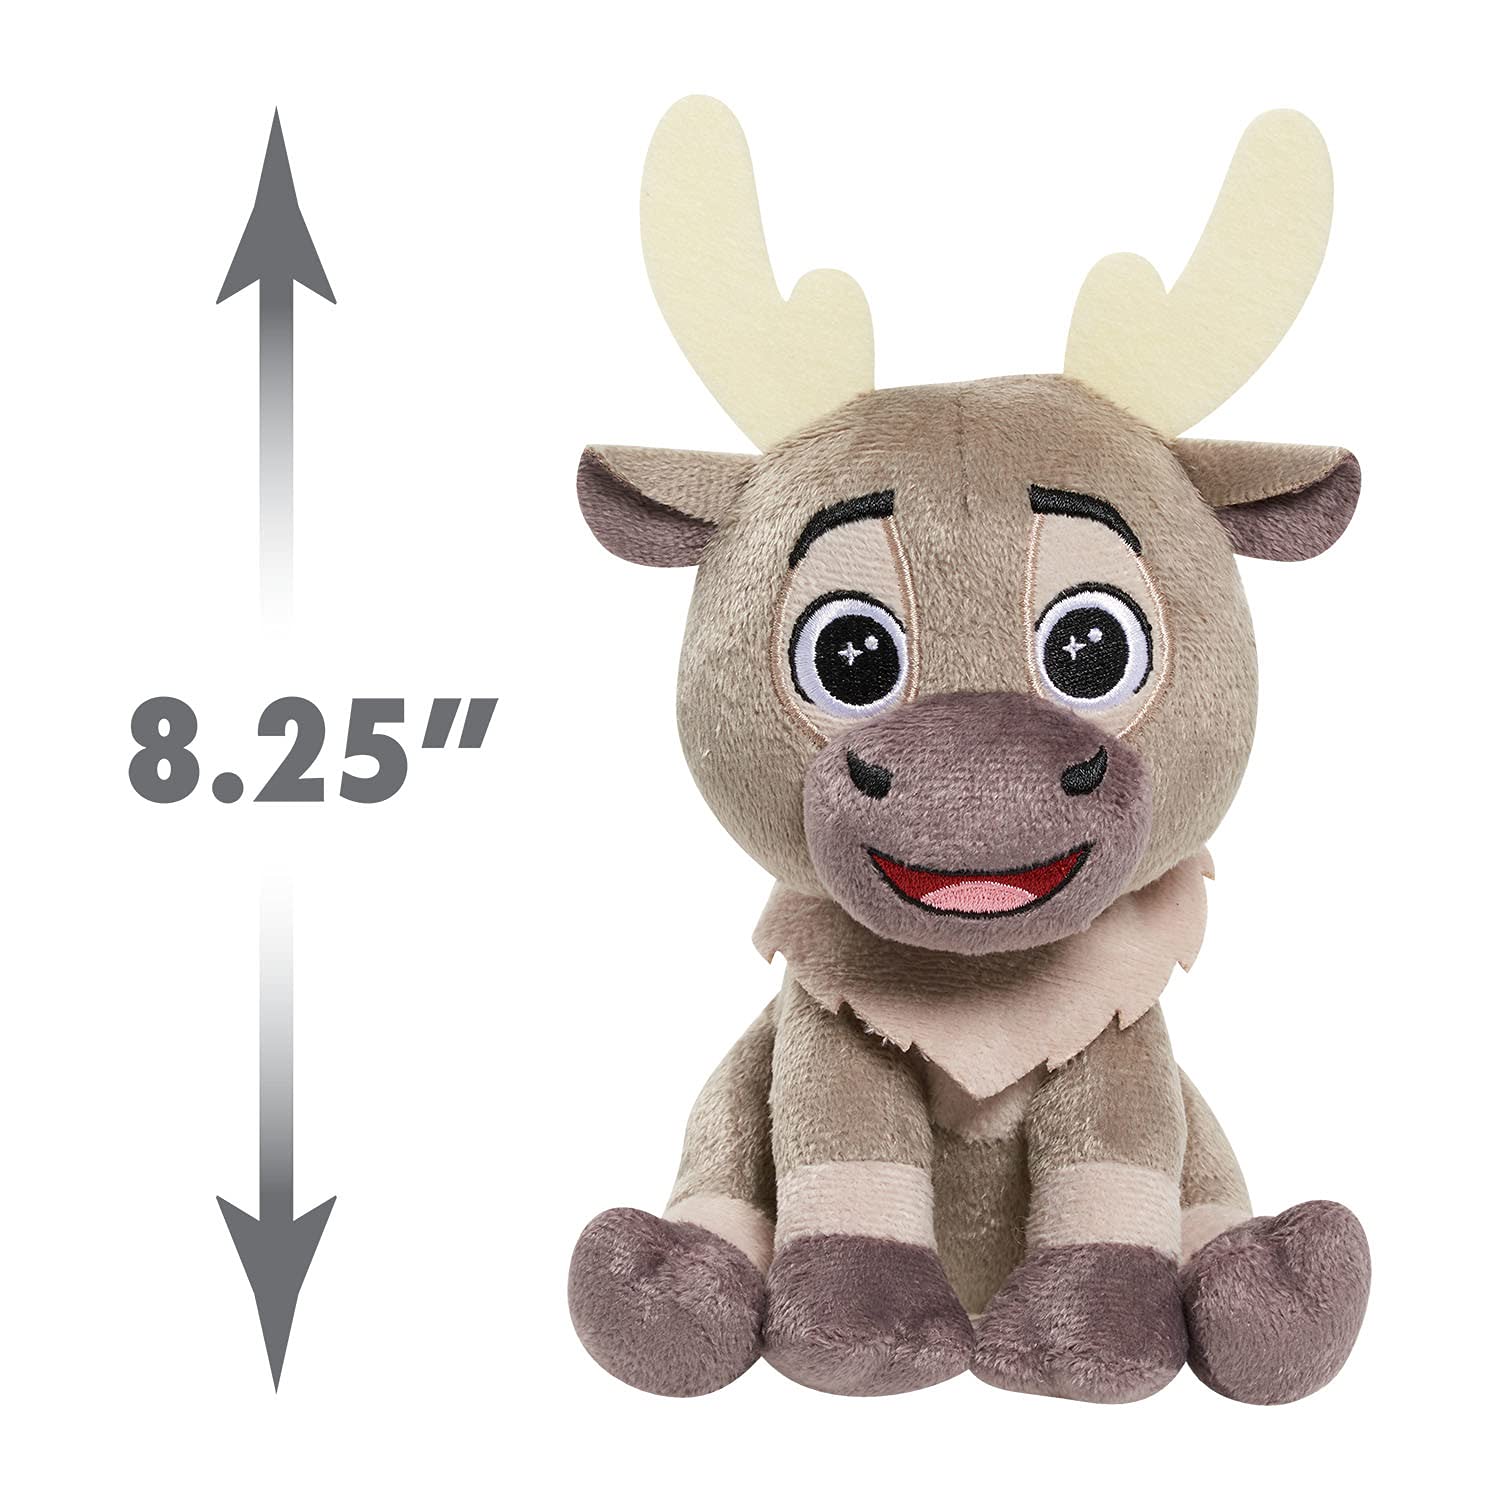 Disney Frozen Talking 6 Inch Small Plushie Toy, Sven, Stuffed Animal, Reindeer, Officially Licensed Kids Toys for Ages 3 Up by Just Play